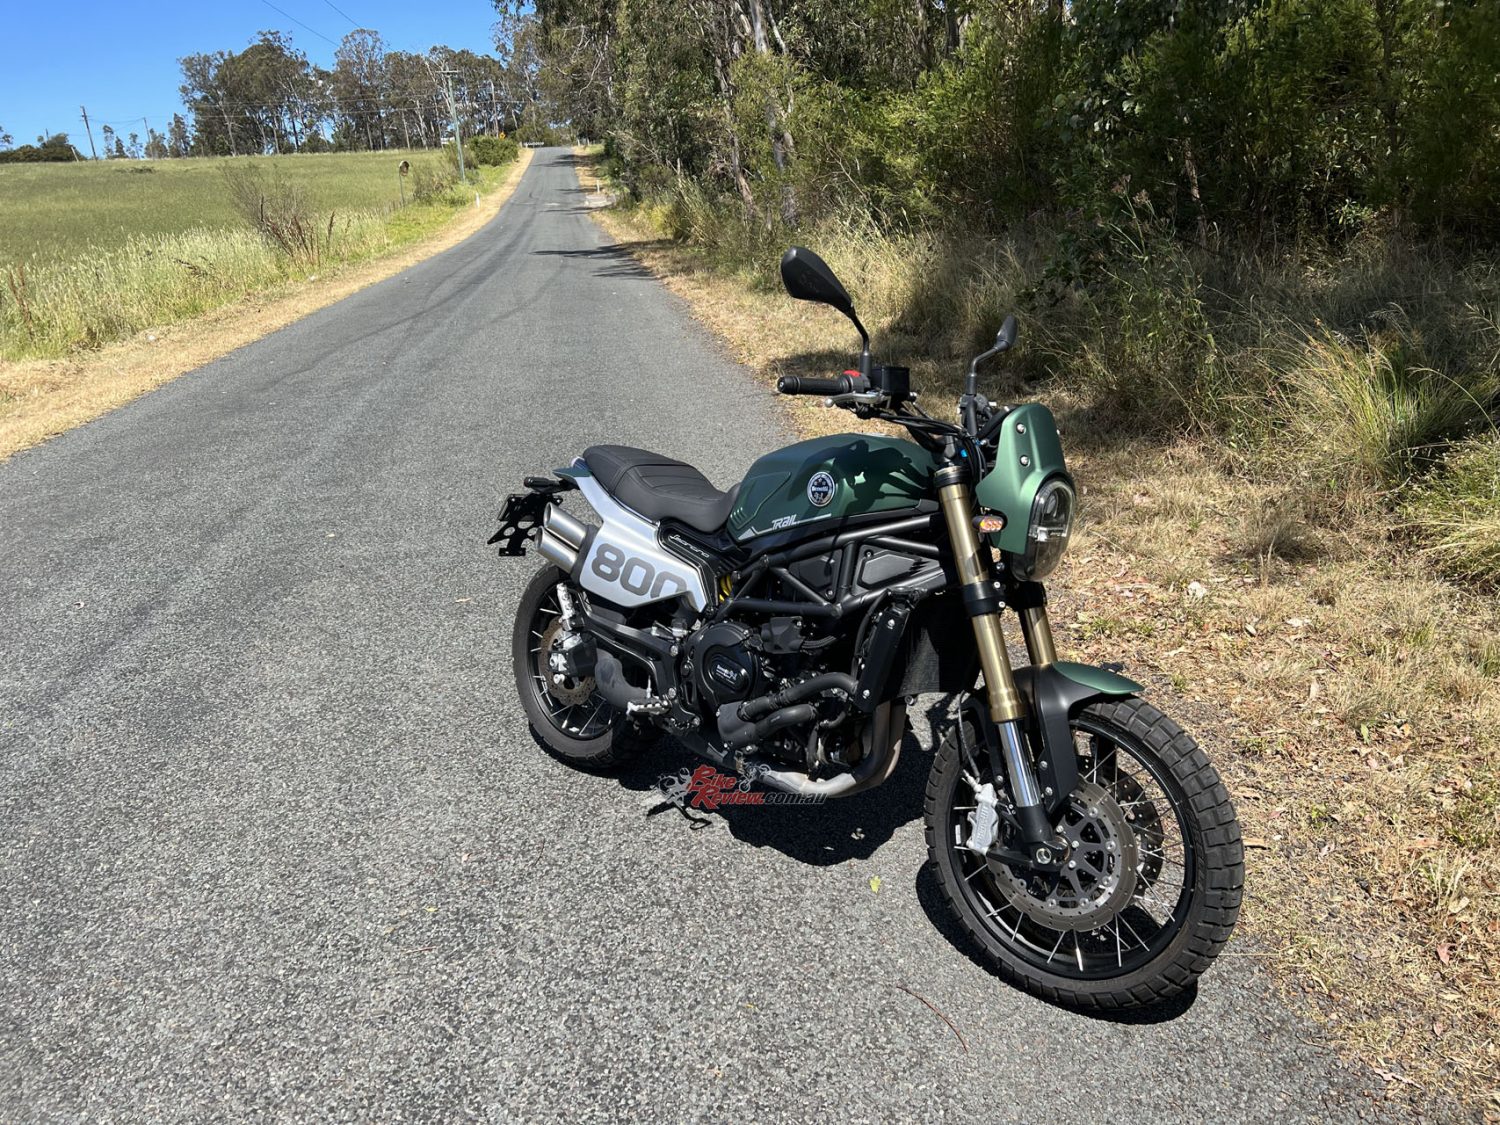 First ride home, the Leoncino 800 Trail feels even better on the familiar roads of the Illawarra.